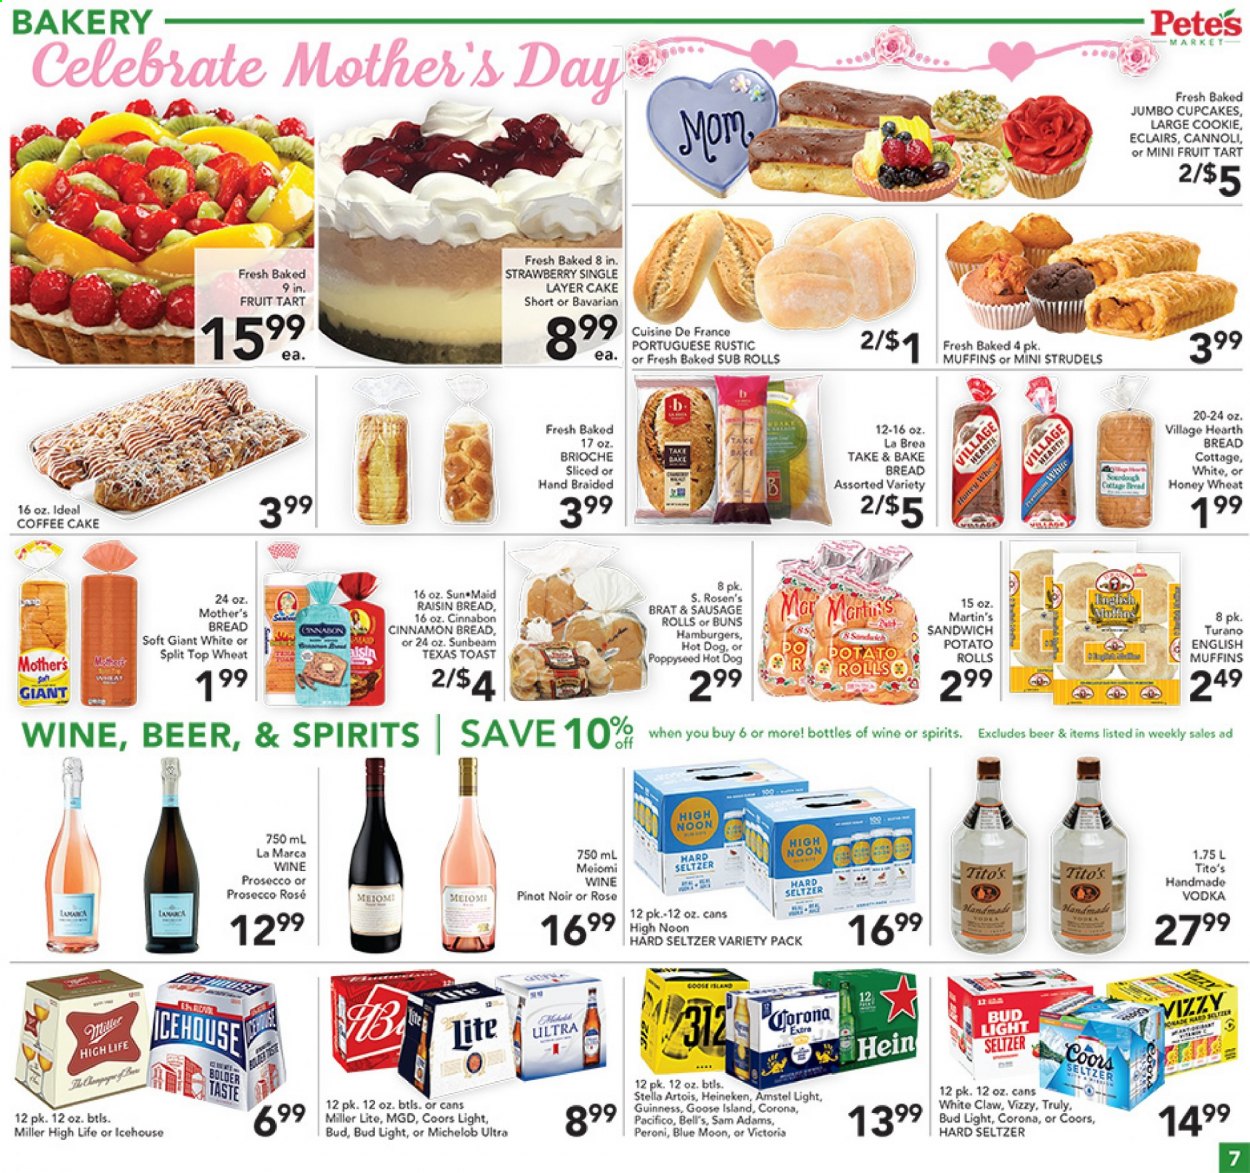 thumbnail - Pete's Fresh Market Flyer - 05/05/2021 - 05/11/2021 - Sales products - bread, cottage bread, english muffins, sausage rolls, cake, buns, potato rolls, sandwich rolls, cupcake, sweet bread, coffee cake, fruit tart, dessert, éclairs, pastries, hot dog, sandwich, hamburger, cookies, red wine, sparkling wine, Pinot Noir, vodka, White Claw, Hard Seltzer, TRULY, beer, Stella Artois, Bud Light, Corona Extra, Heineken, Guinness, Peroni, Amstel, Bell's, Miller Lite, Coors, Blue Moon, Michelob. Page 7.